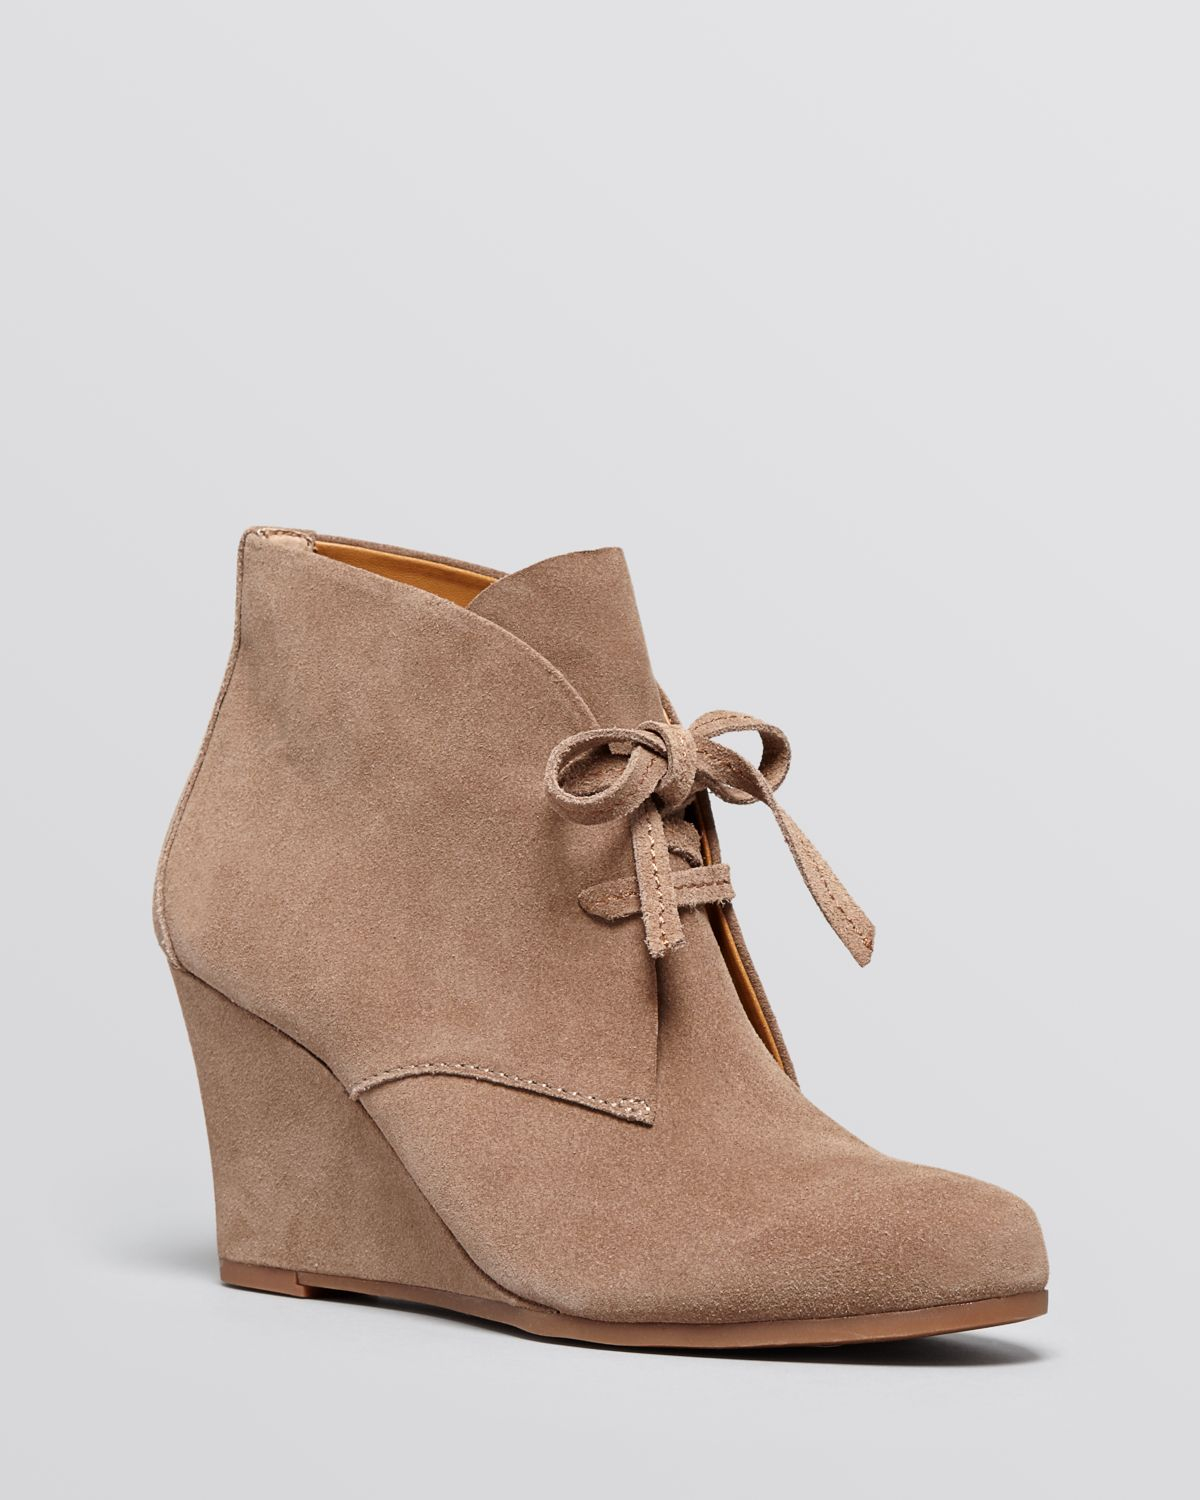 Dolce Vita Jemima Cutout Suede Ankle Boots in Beige (nude 